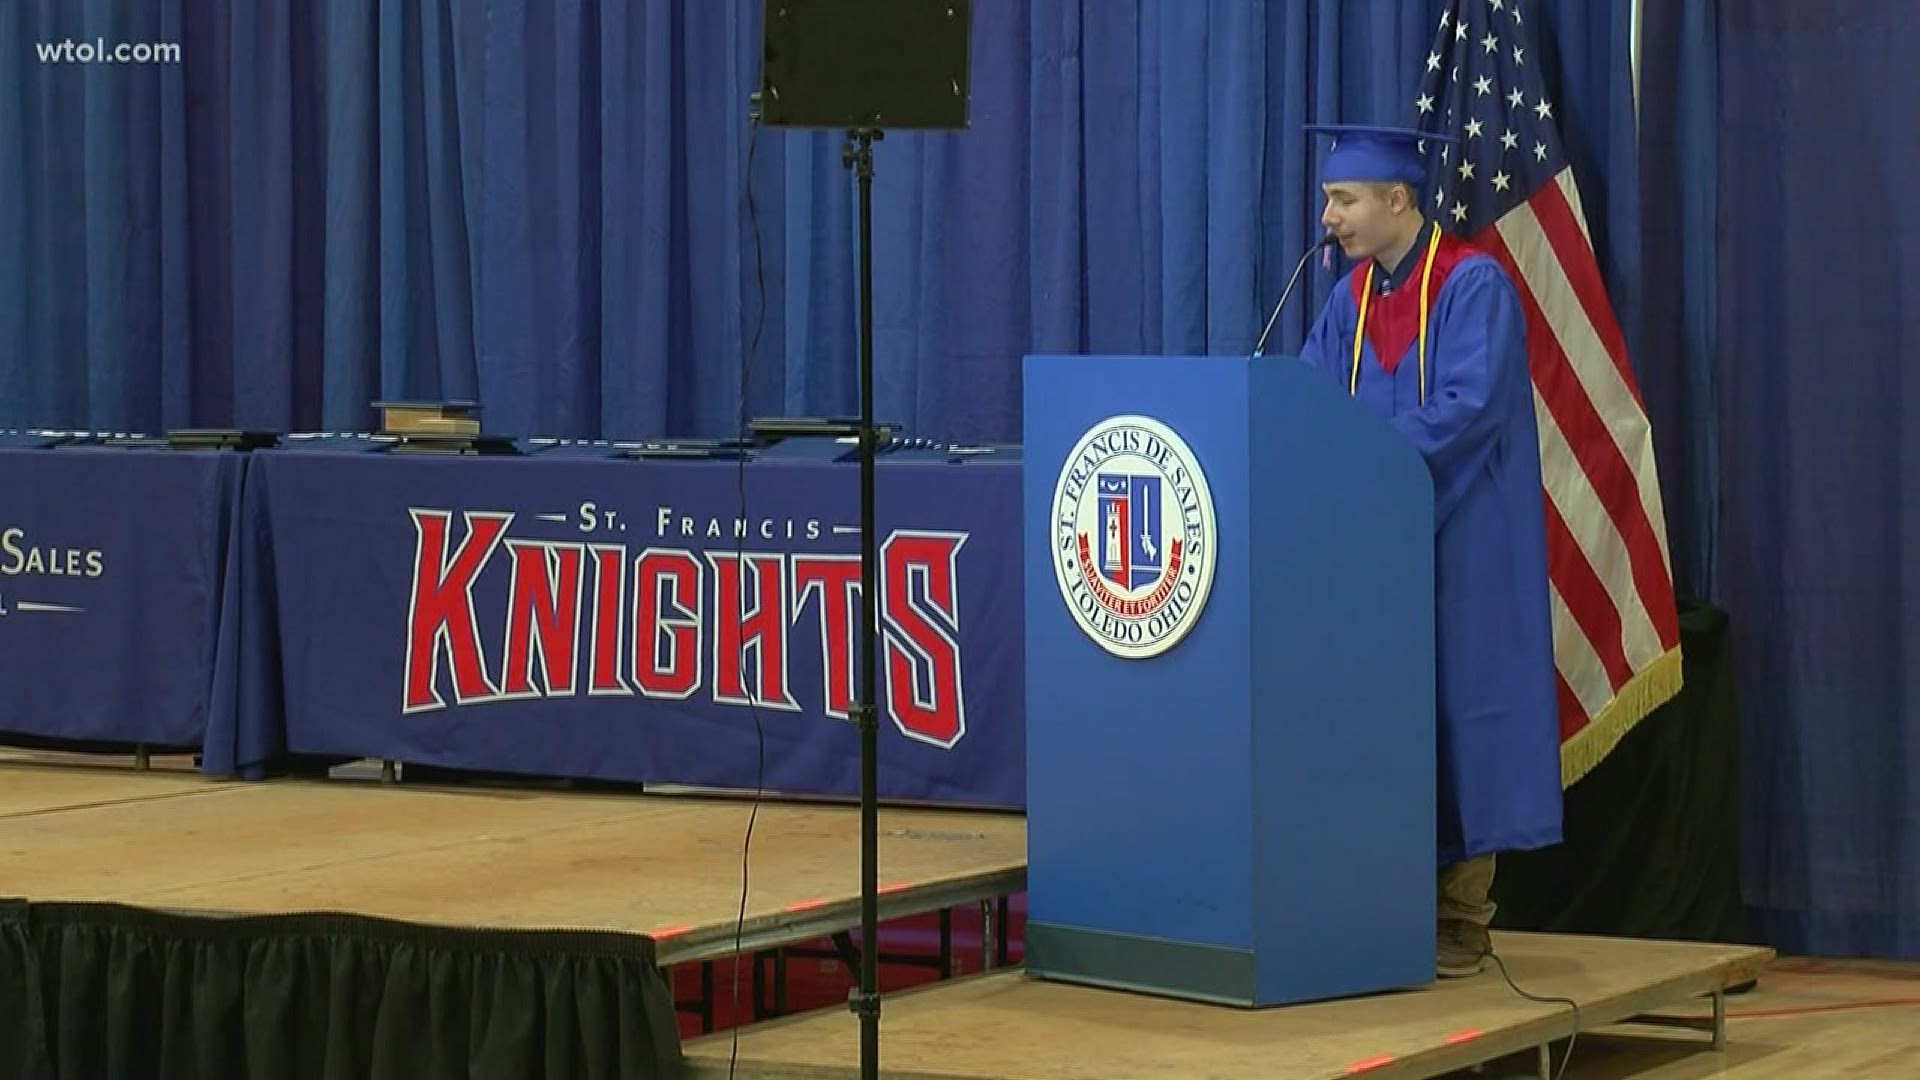 St. Francis senior is blind but that didn’t stop him from being named valedictorian of his class with a 4.638 GPA.